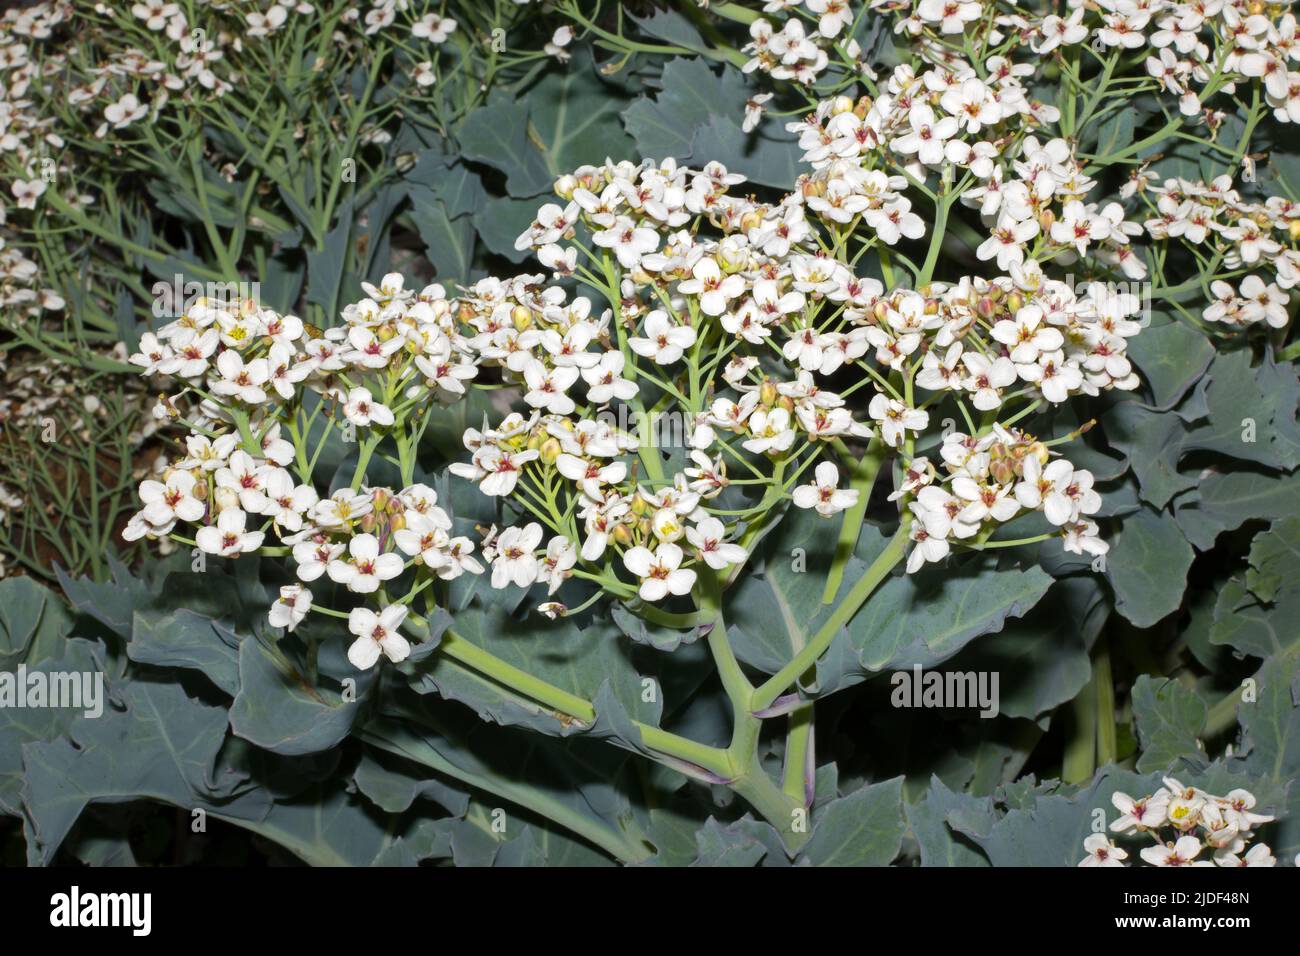 Crambe maritima (sea kale) is a halophytic (salt-tolerant) species found on coastal shingle and appears to be endemic to Europe. Stock Photo